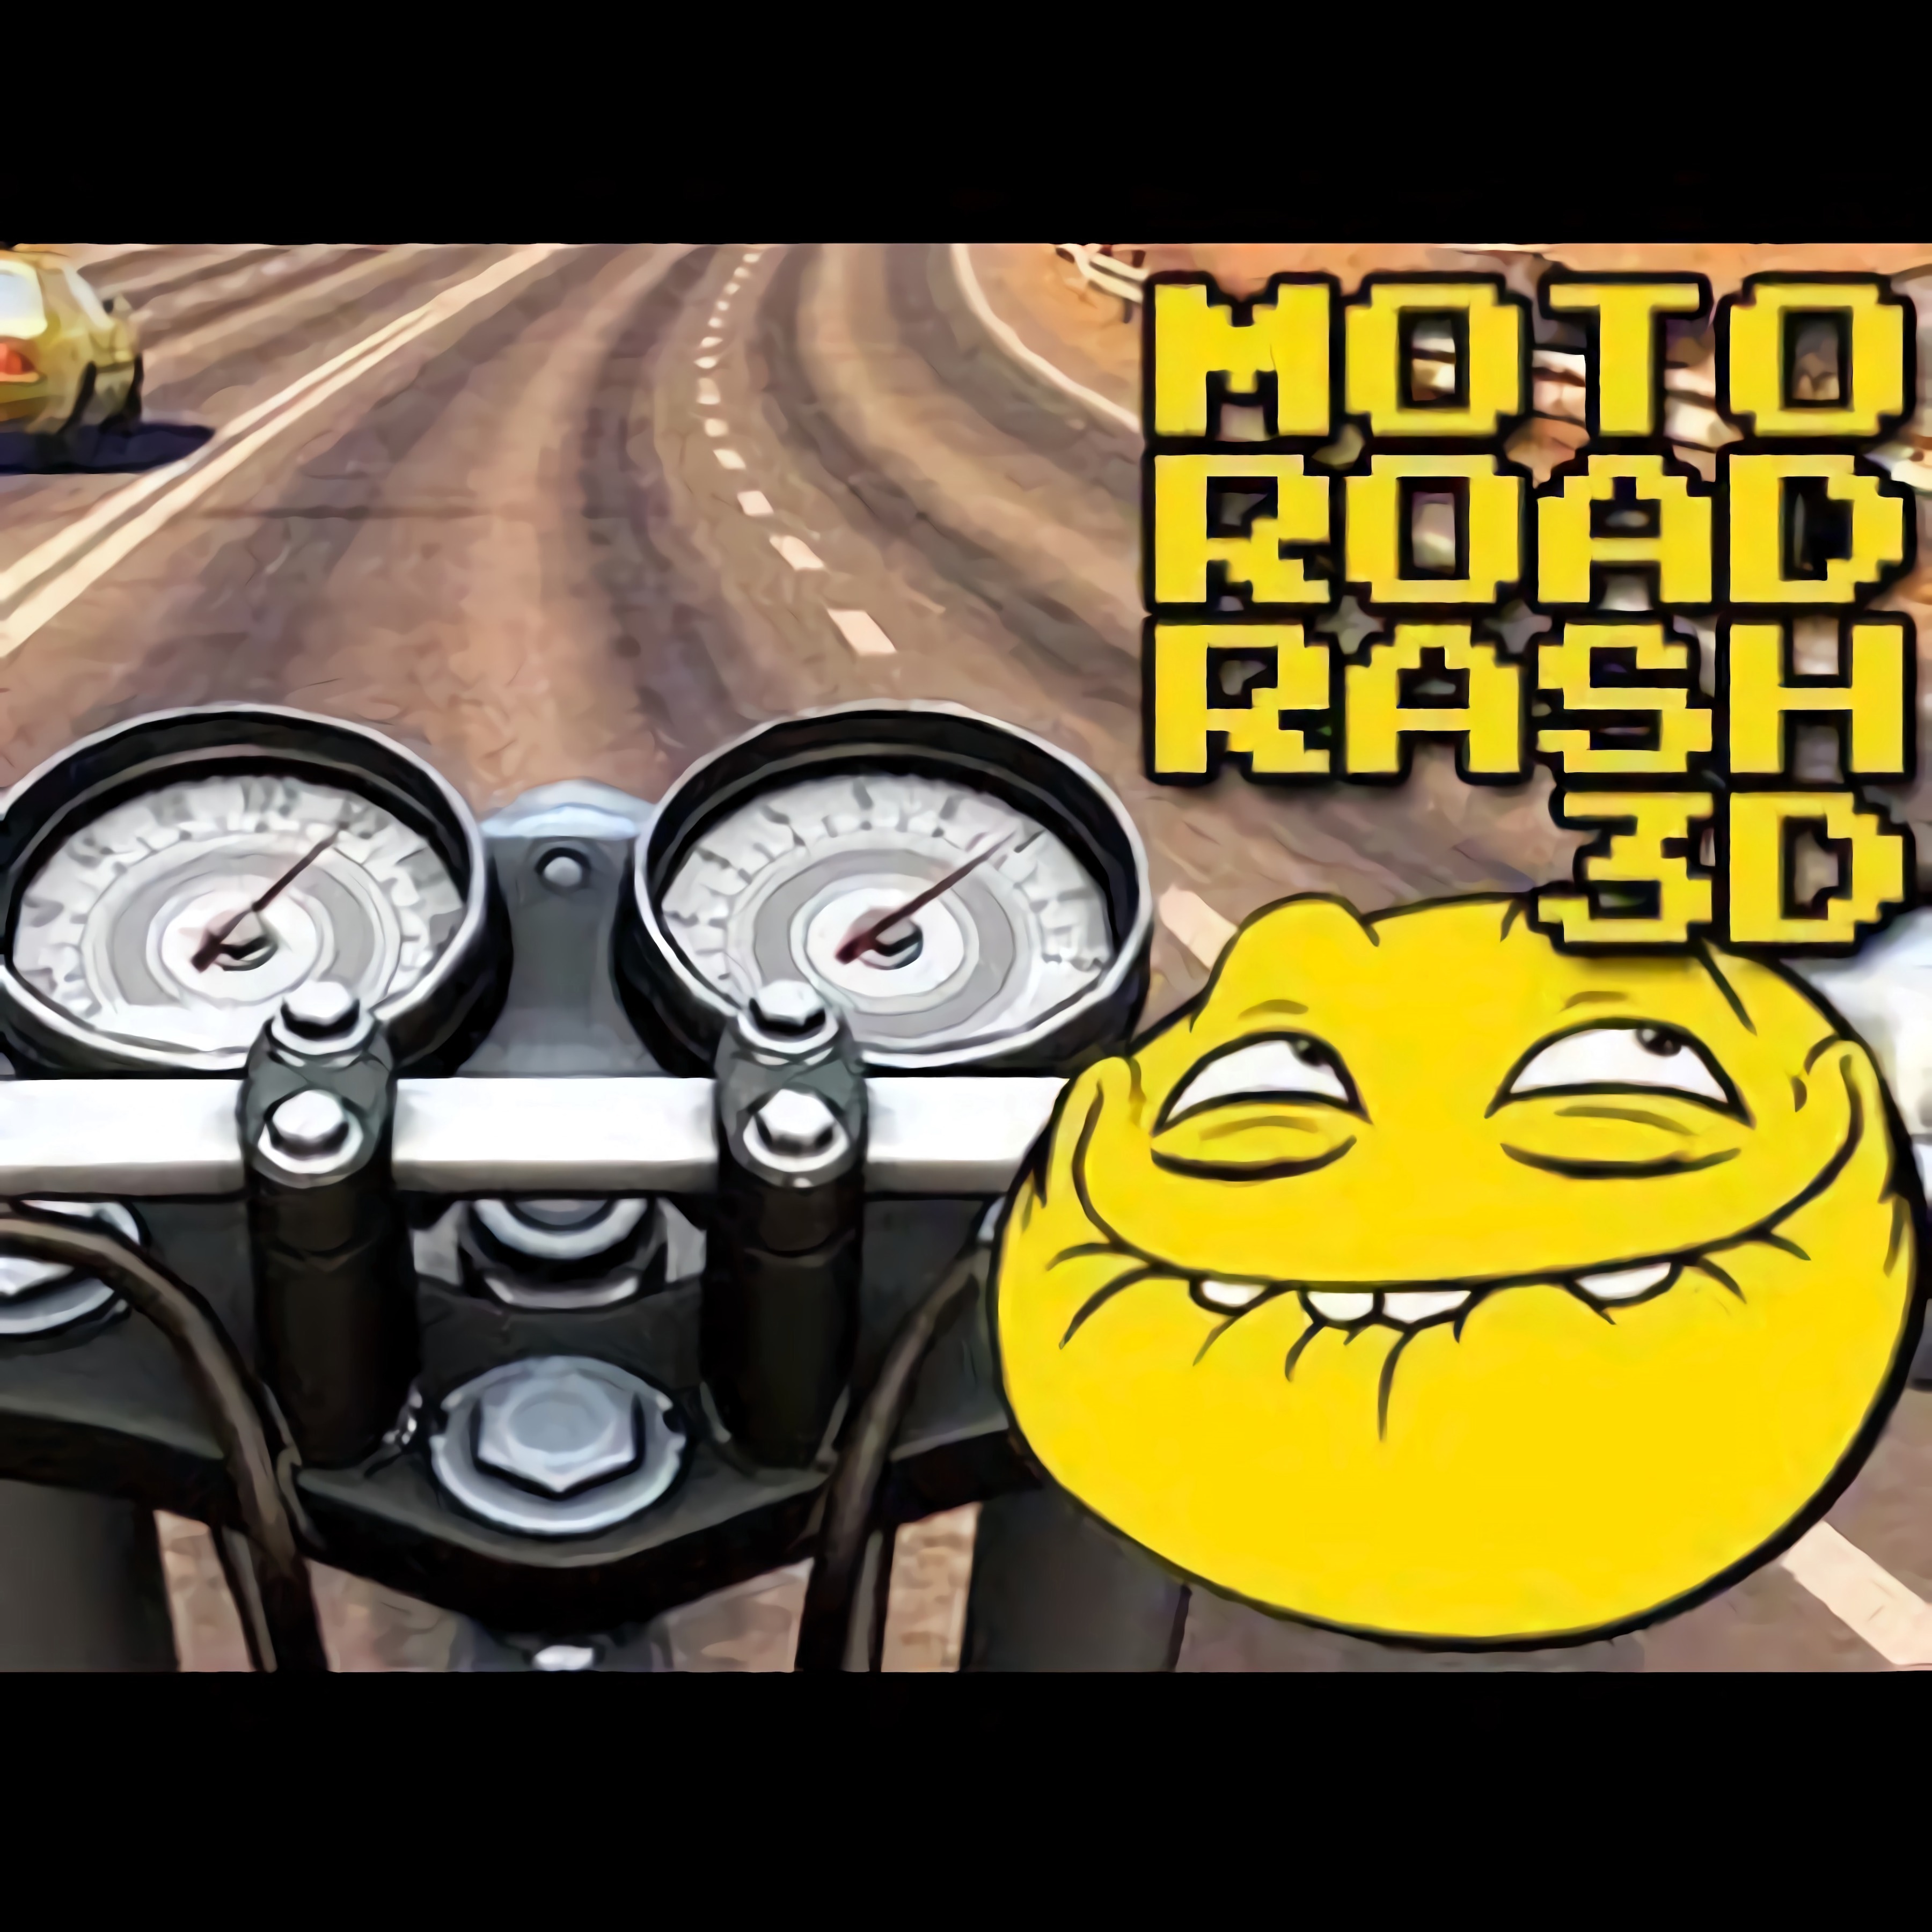 Motorcycle Games - Play Motorcycle Games Online on Friv 2016